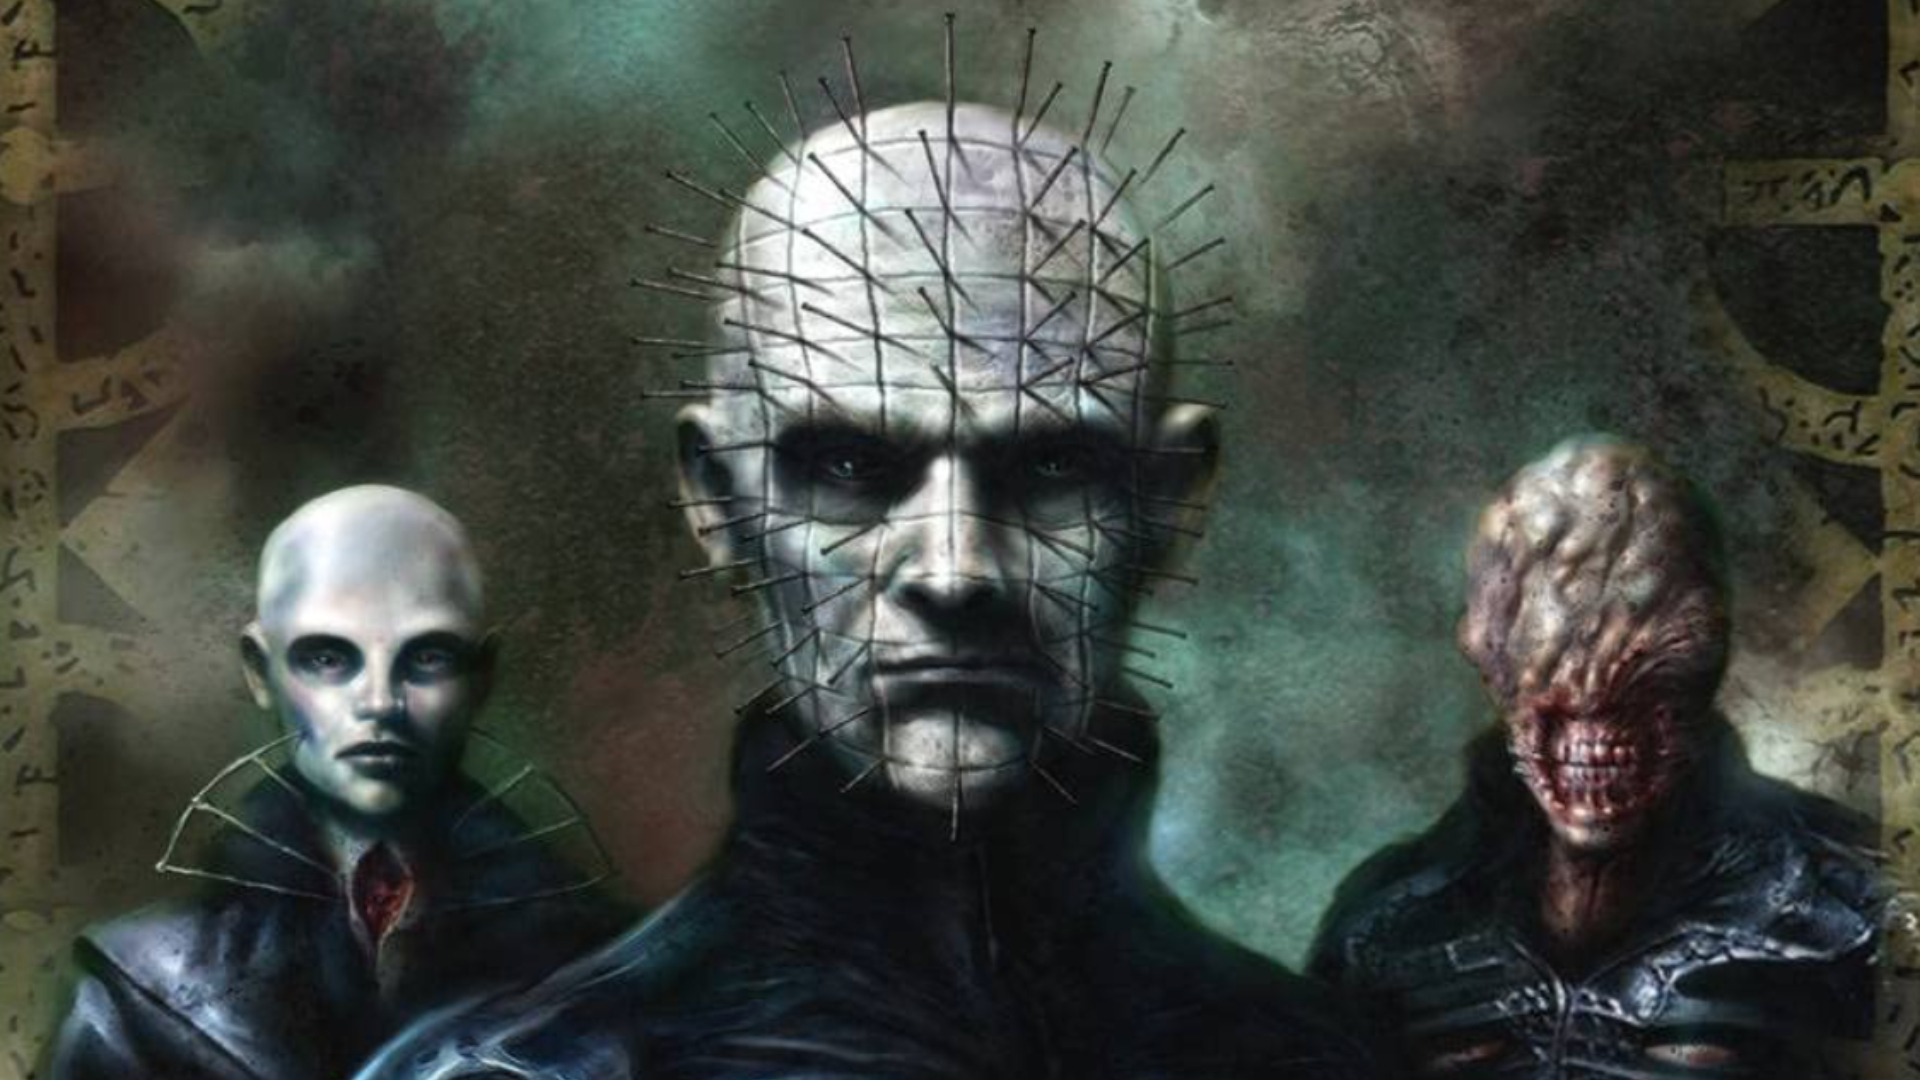 An illustration of 3 menacing humanoid monsters from Hellraiser all dressed in black leather. Left: pale white, bald, with an open wound on their neck. Middle: Pinhead - bald, pale face with their whole head covered in pins. Right: A monster without eyes and just a sneering, bloody grin.